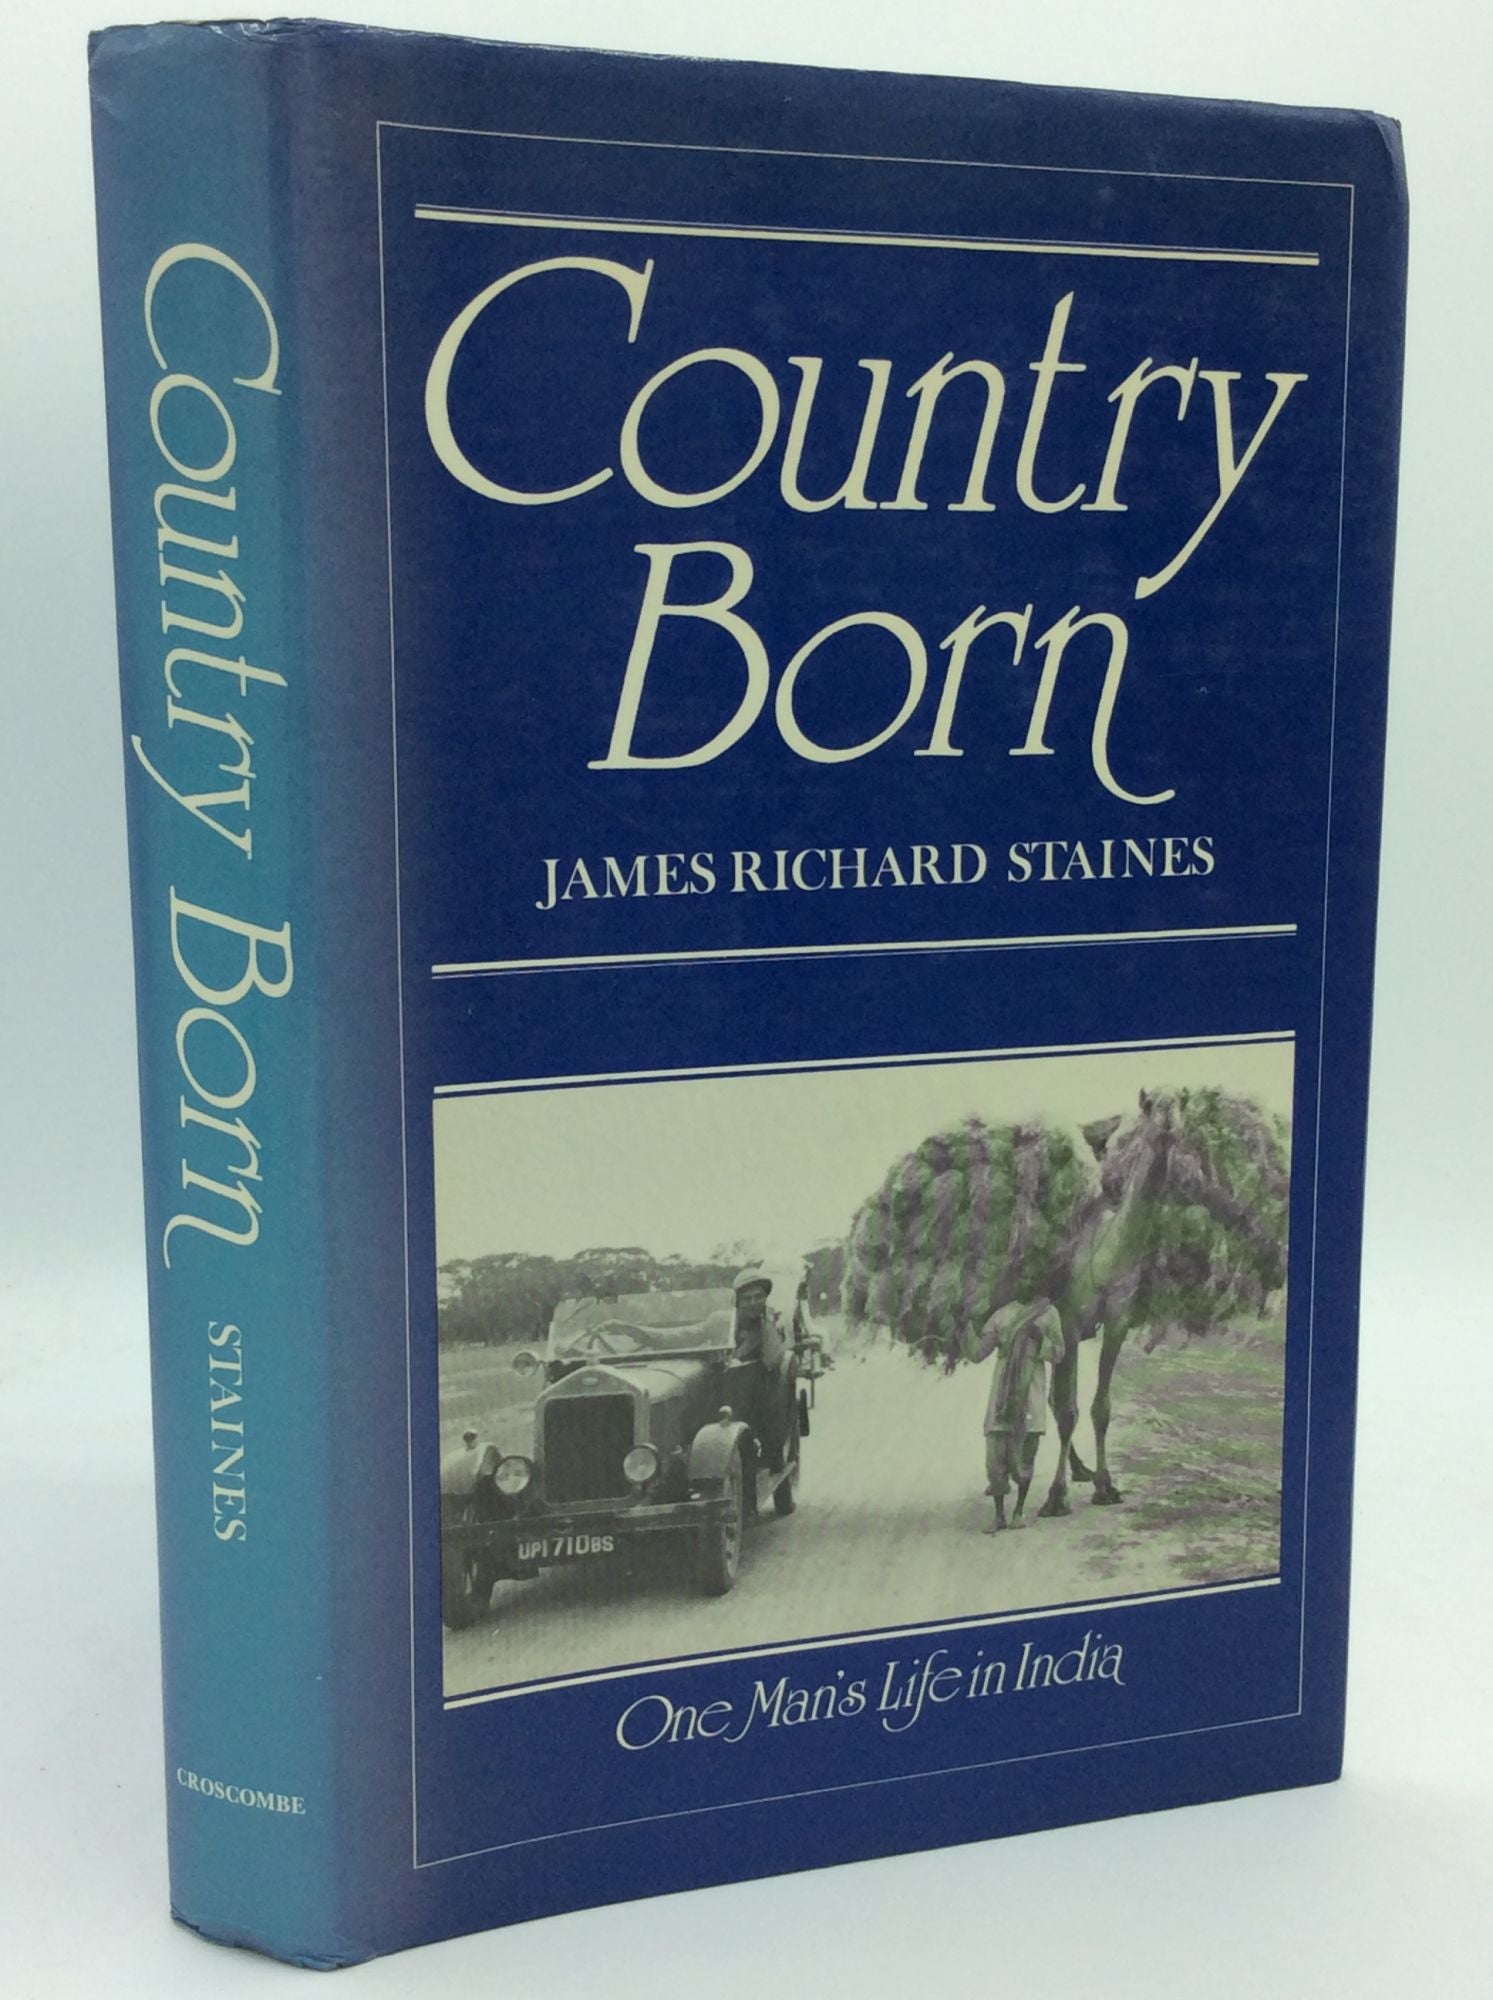 James Richard Staines - Country Born: One Man's Life in India 1909-1947